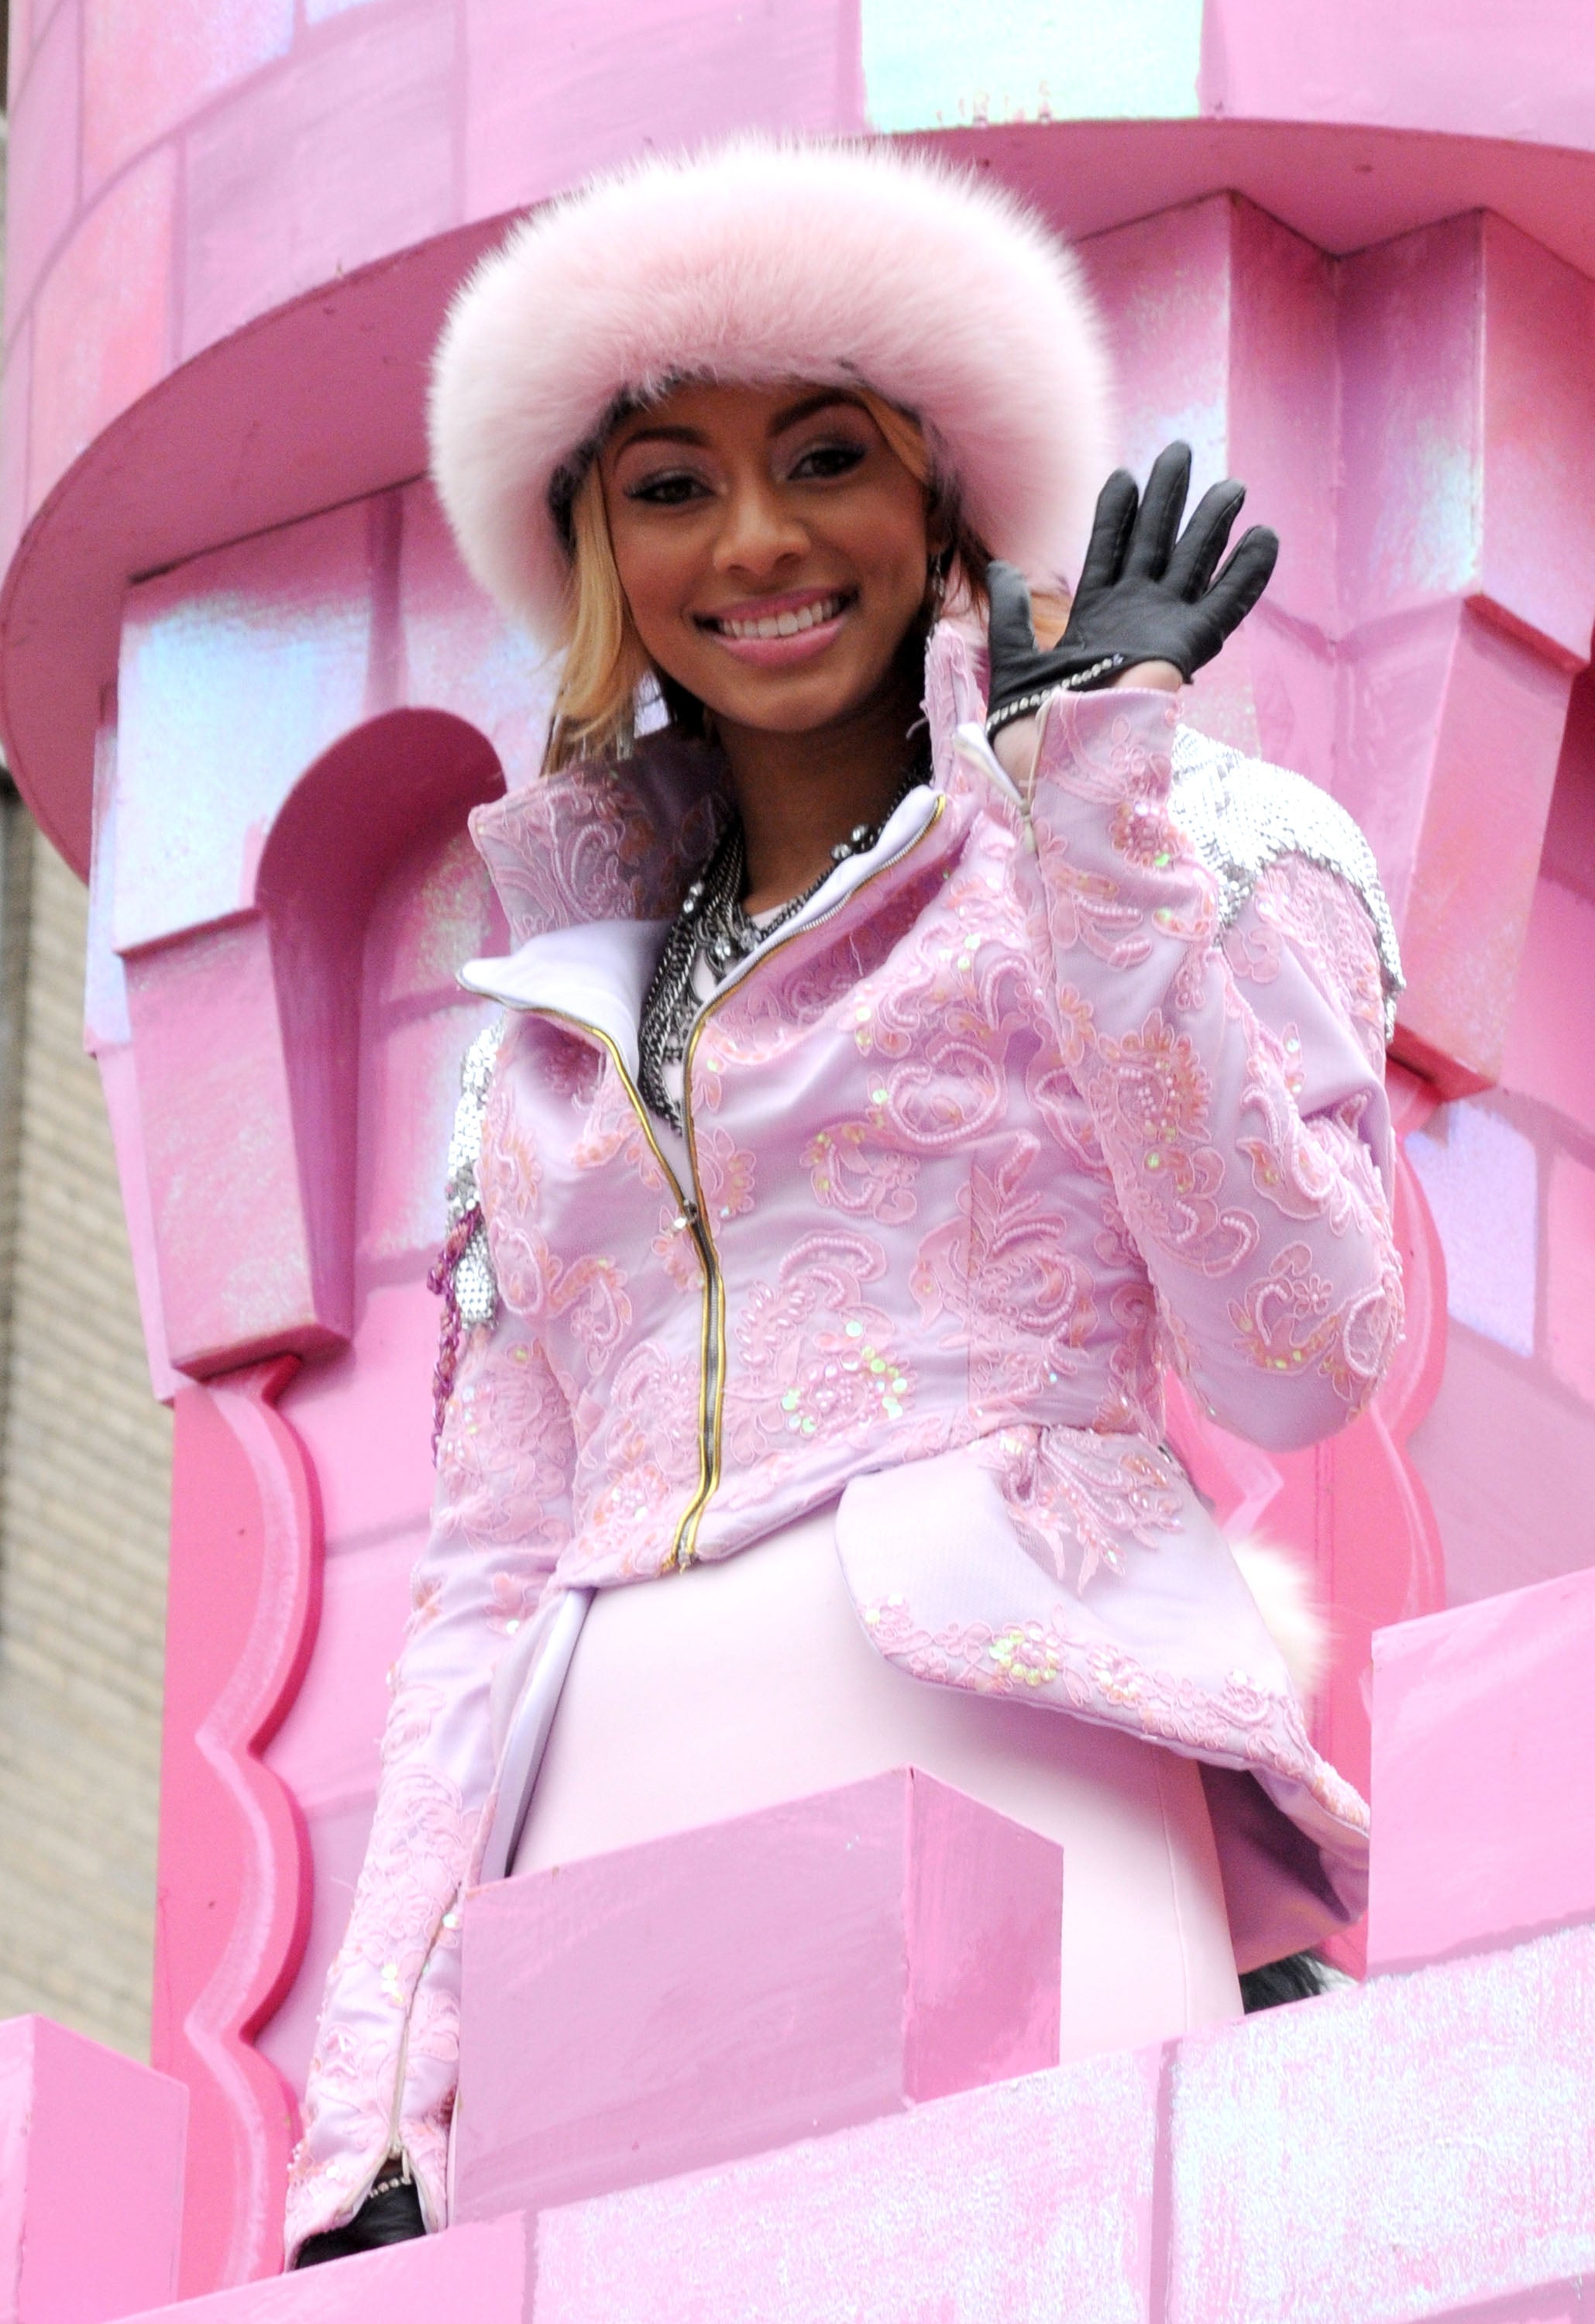 18 Times Our Favorite Celebs Were Fabulous for Macy's Thanksgiving Day Parade
